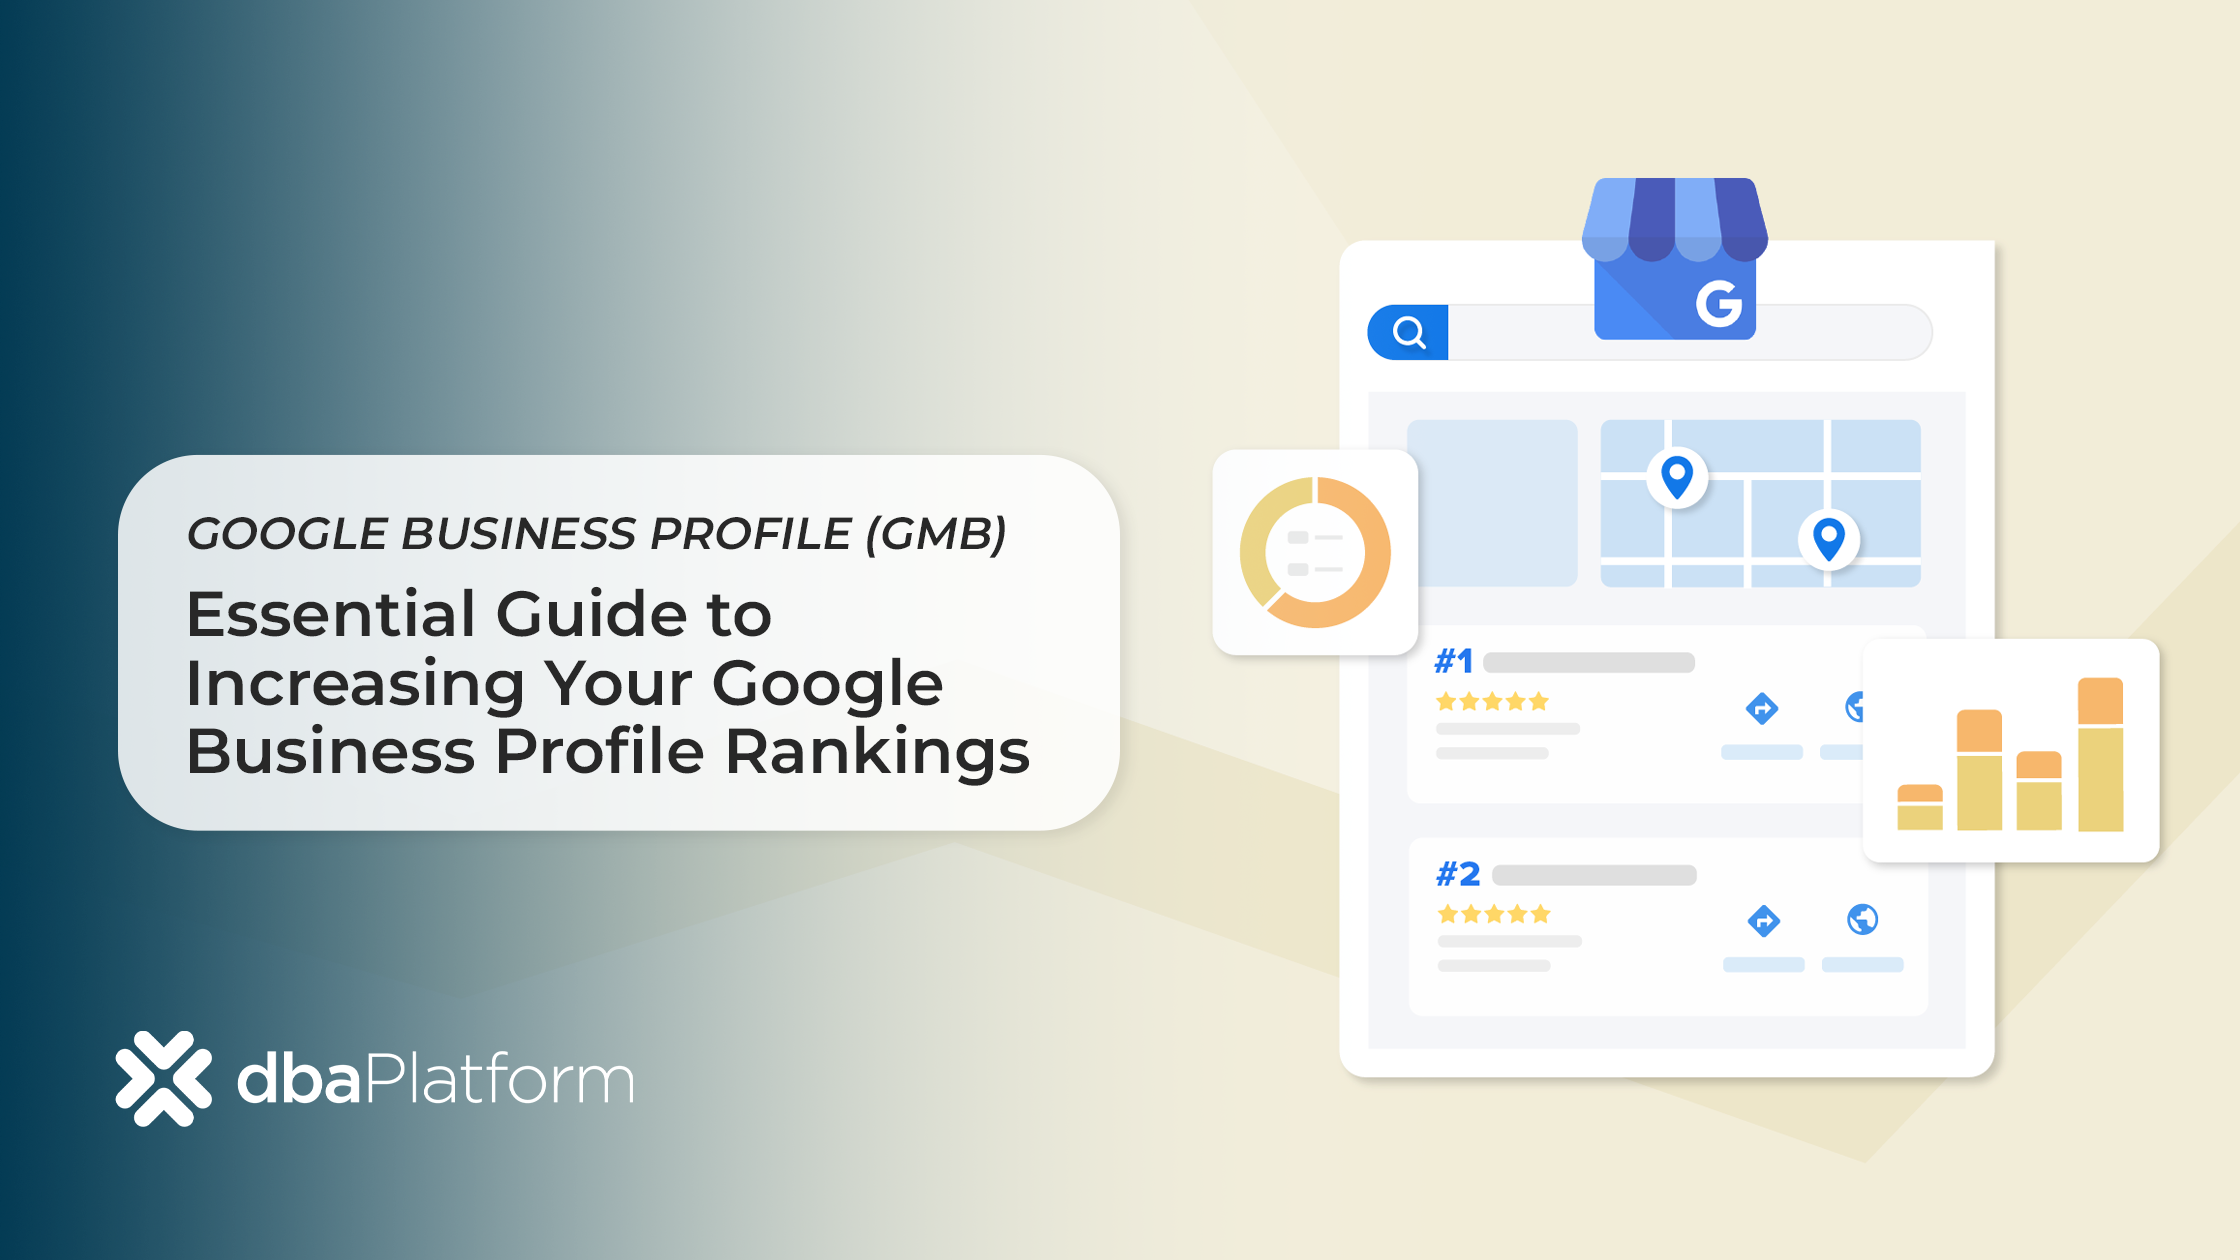 Essential Guide to Increasing Your Google Business Profile Rankings